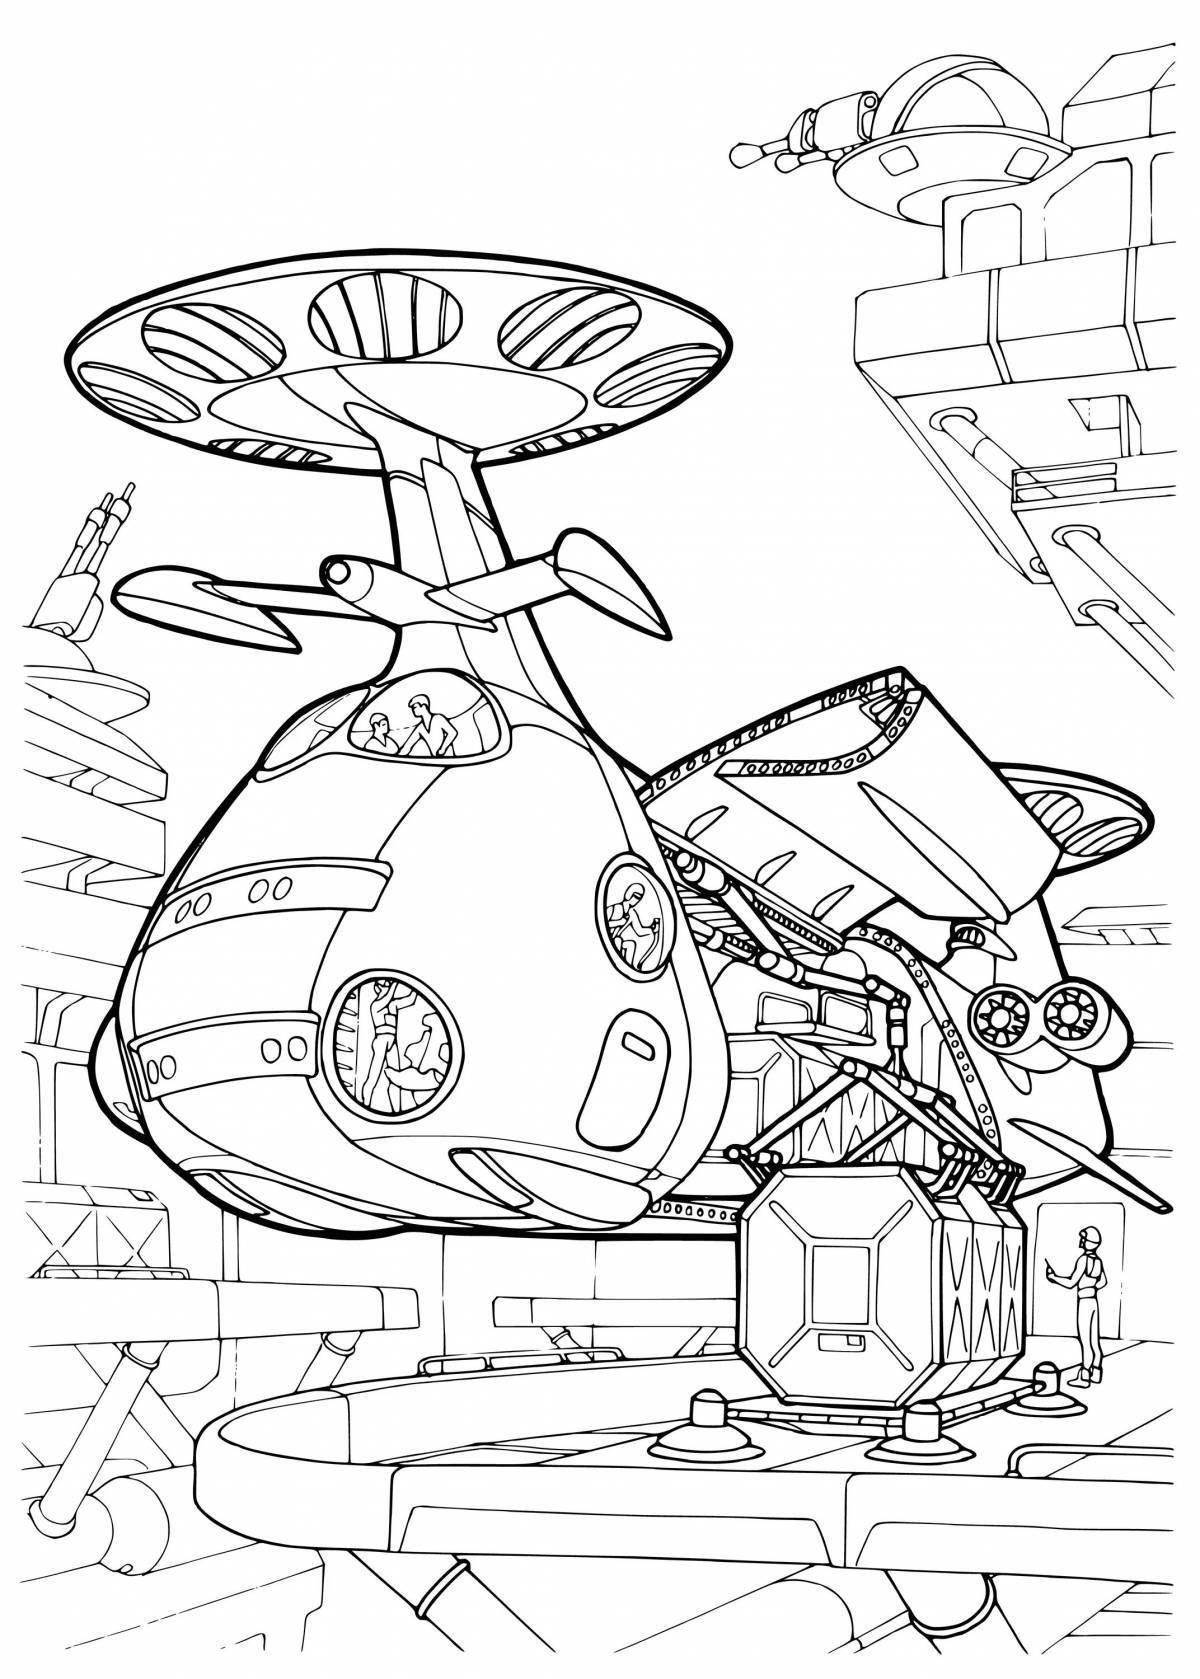 Adorable flying car coloring page